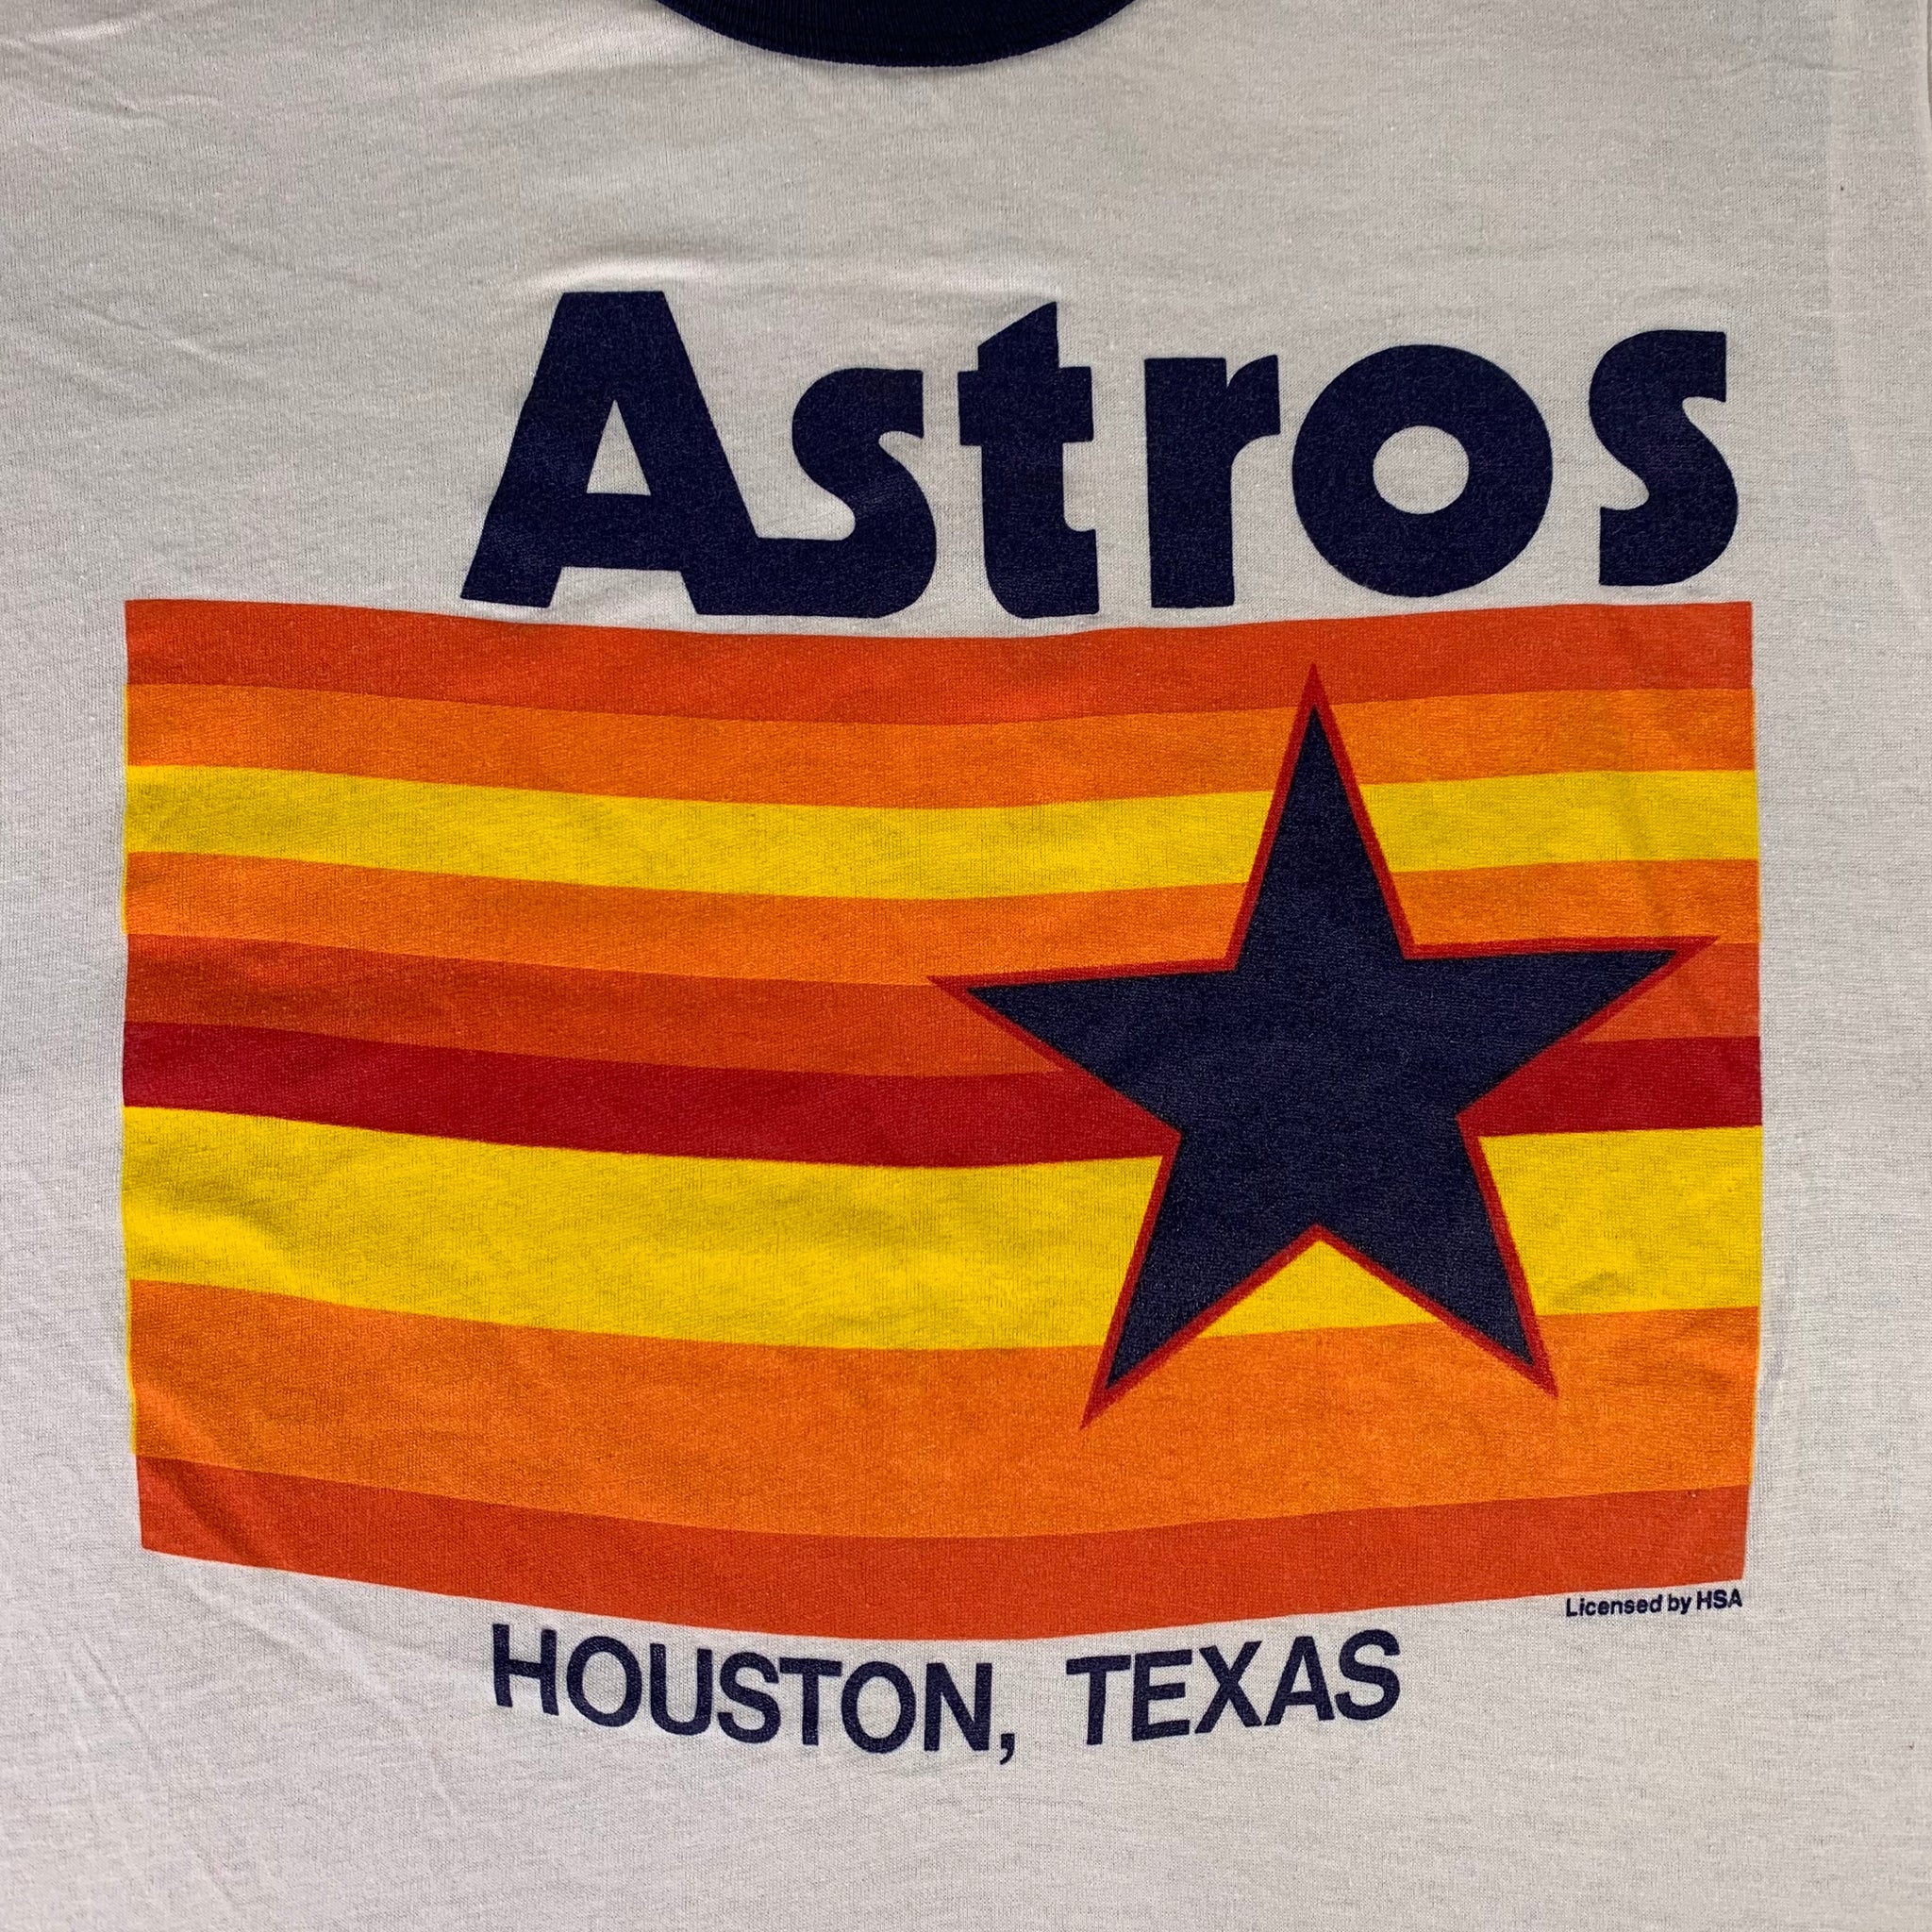 Official Vintage Astros Clothing, Throwback Houston Astros Gear